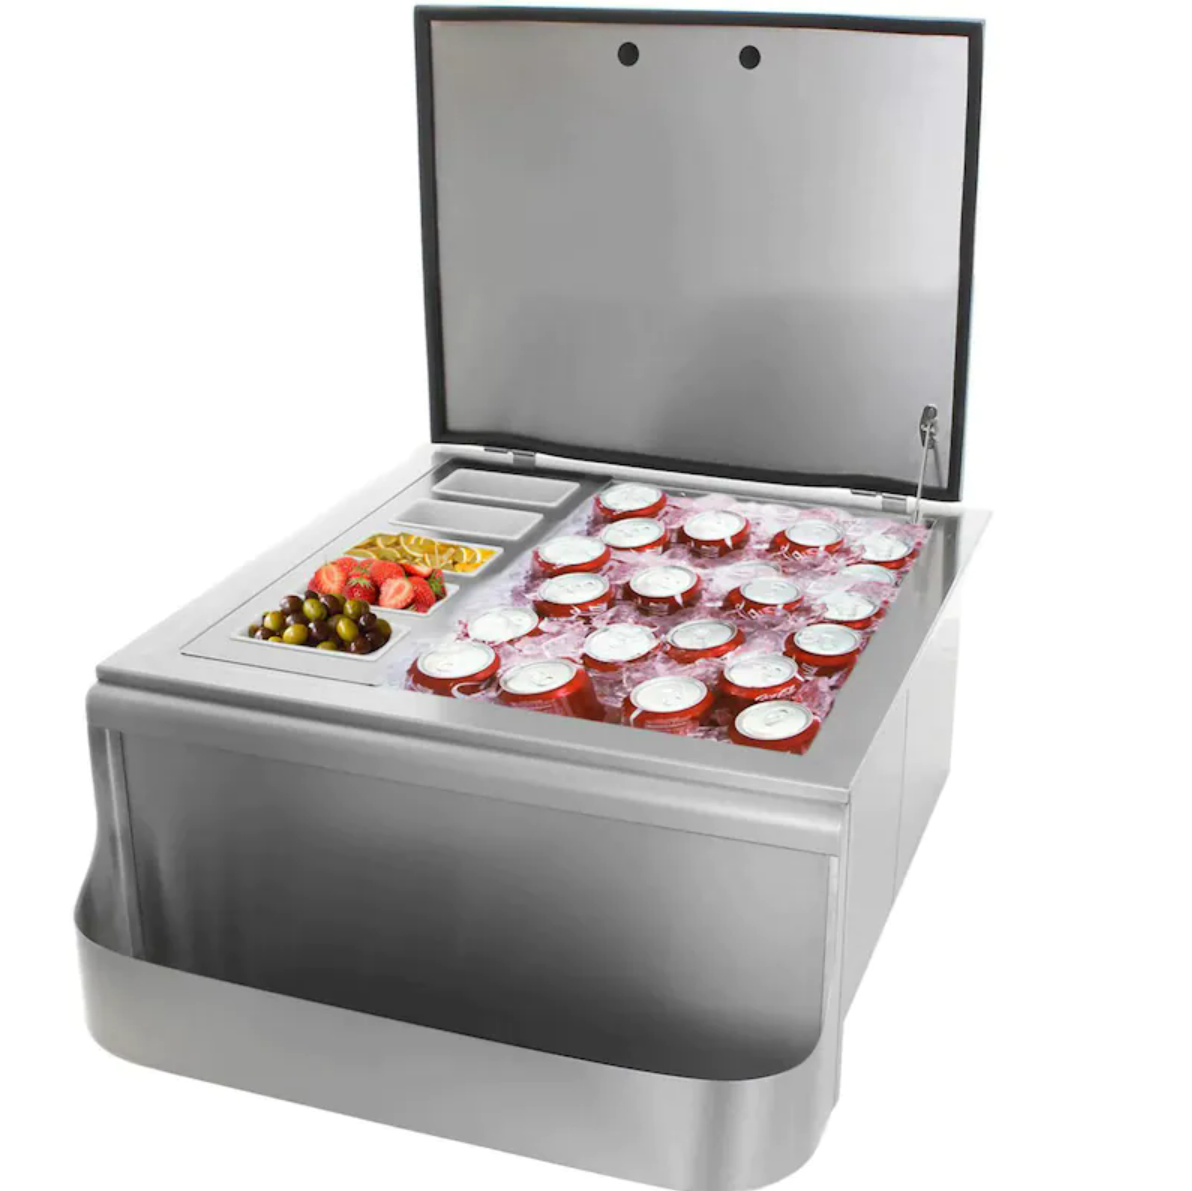 PCM 260 Series 25" Slide-In Ice Bin Cooler With Speed Rail & Condiment Holder